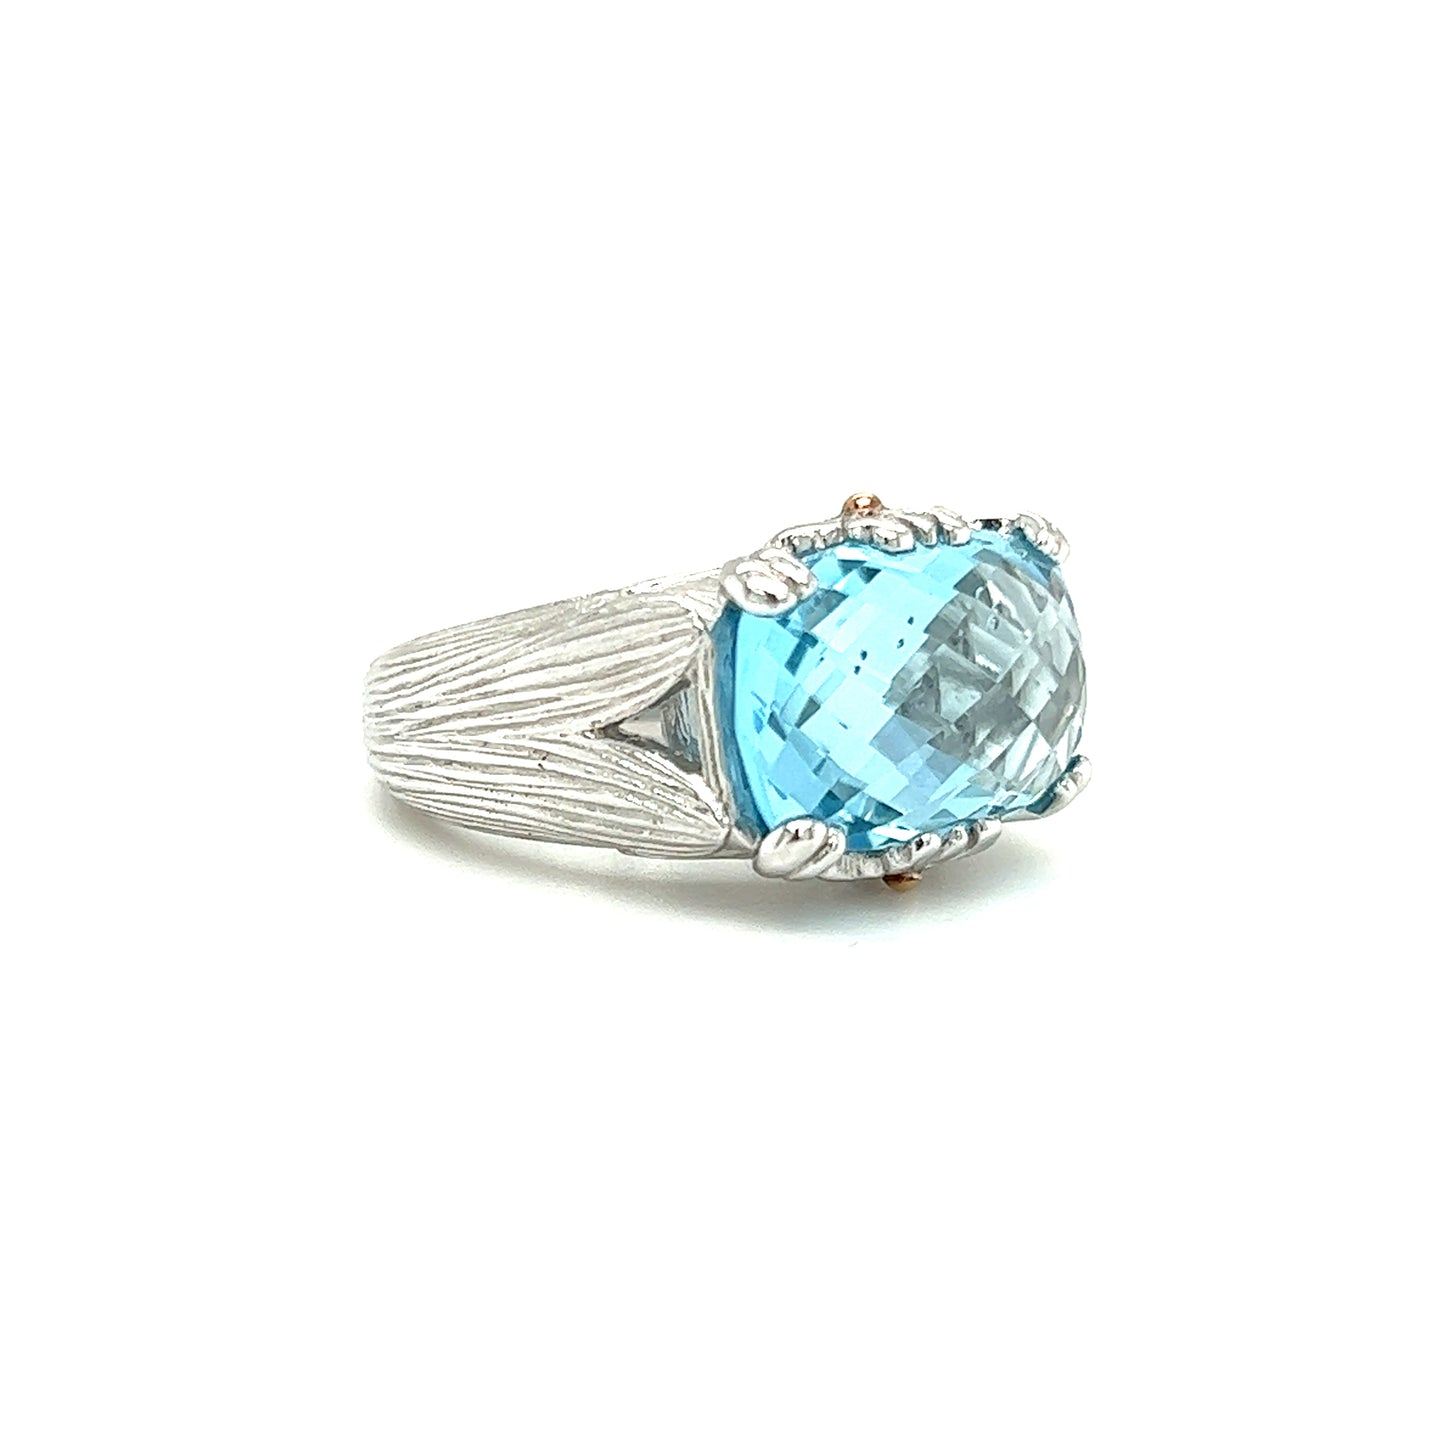 Elongated Cushion Blue Topaz Ring with 18K Yellow Gold Accents in Sterling Silver Left Side View